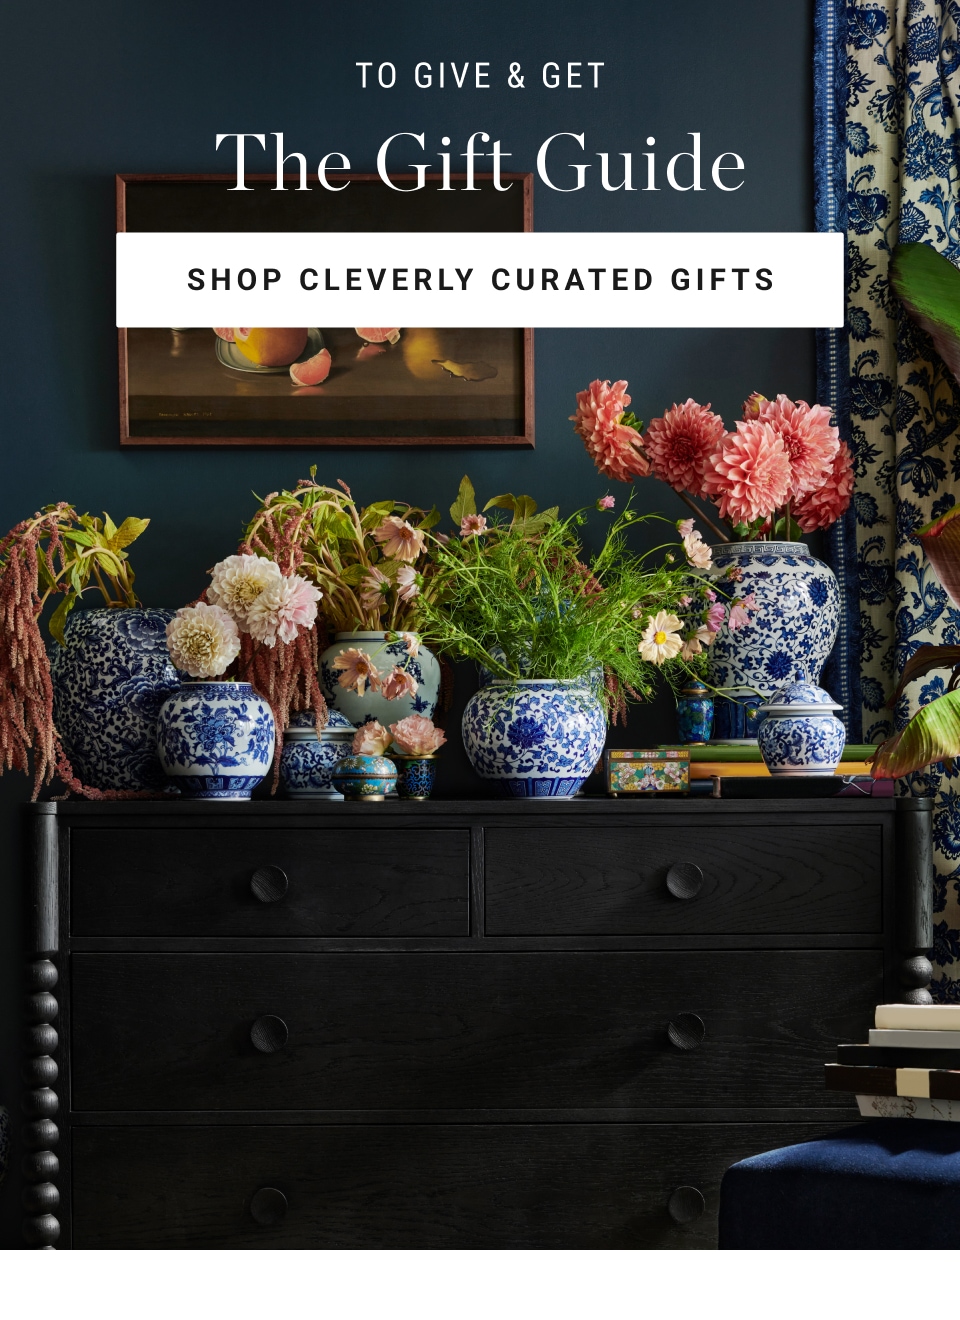 The cheapest luxury brand items that come with gift boxes for home decor